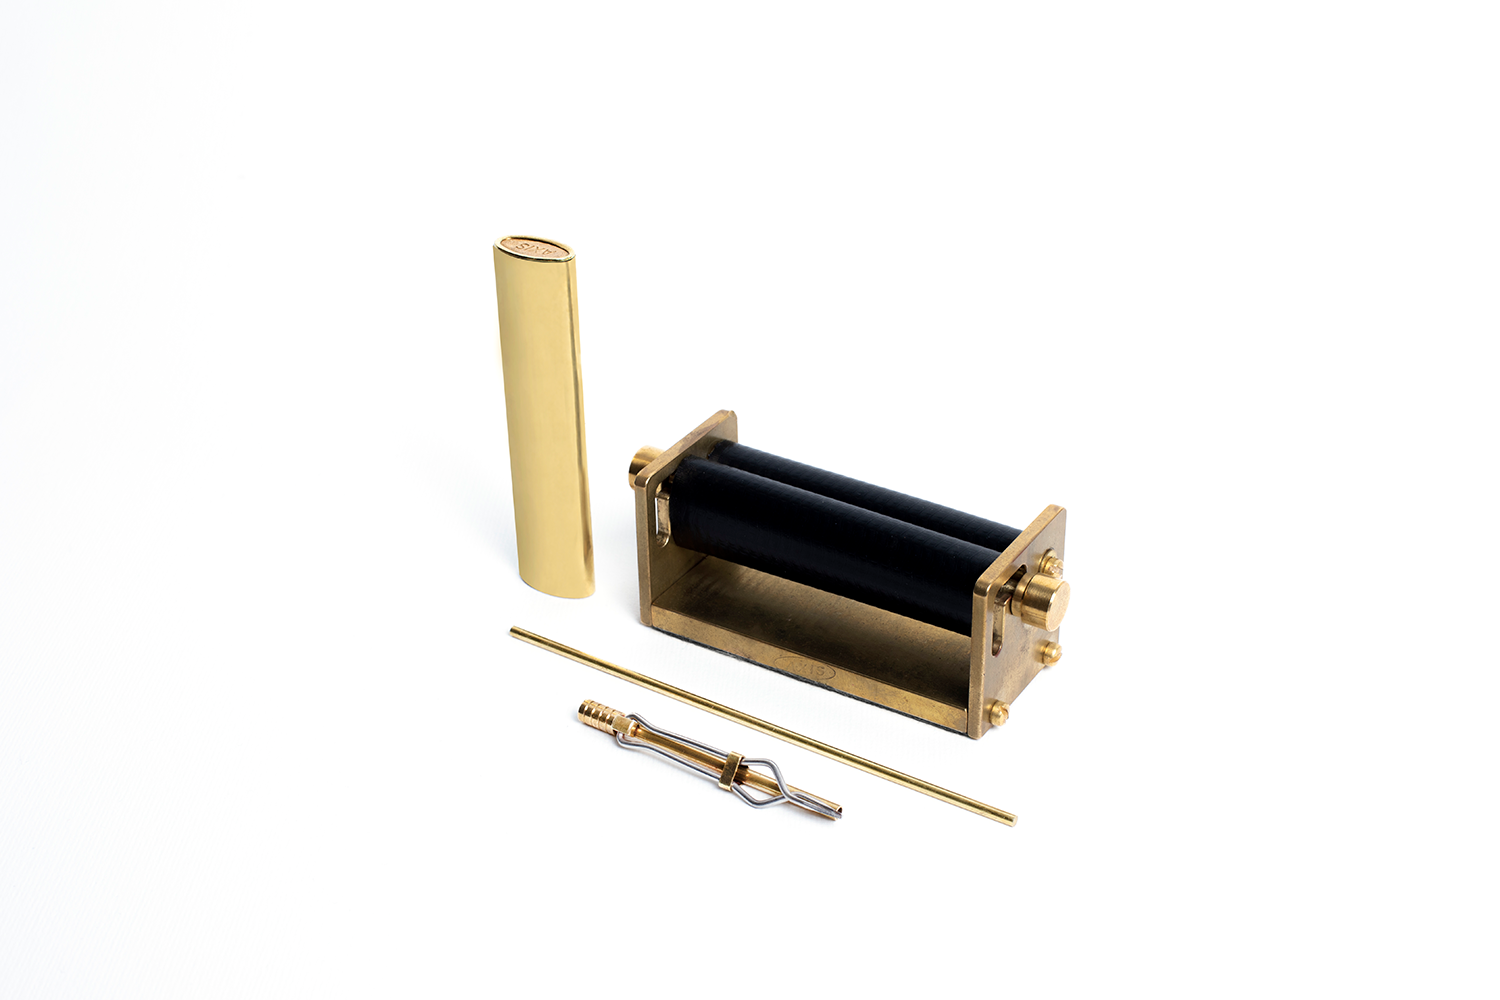 AXIS Smoking Products are elegant and sophisticated smoking accessories for smoking enthusiasts and connoisseurs. Our products are made from 100% Polished Brass and Tempered Stainless Steel.